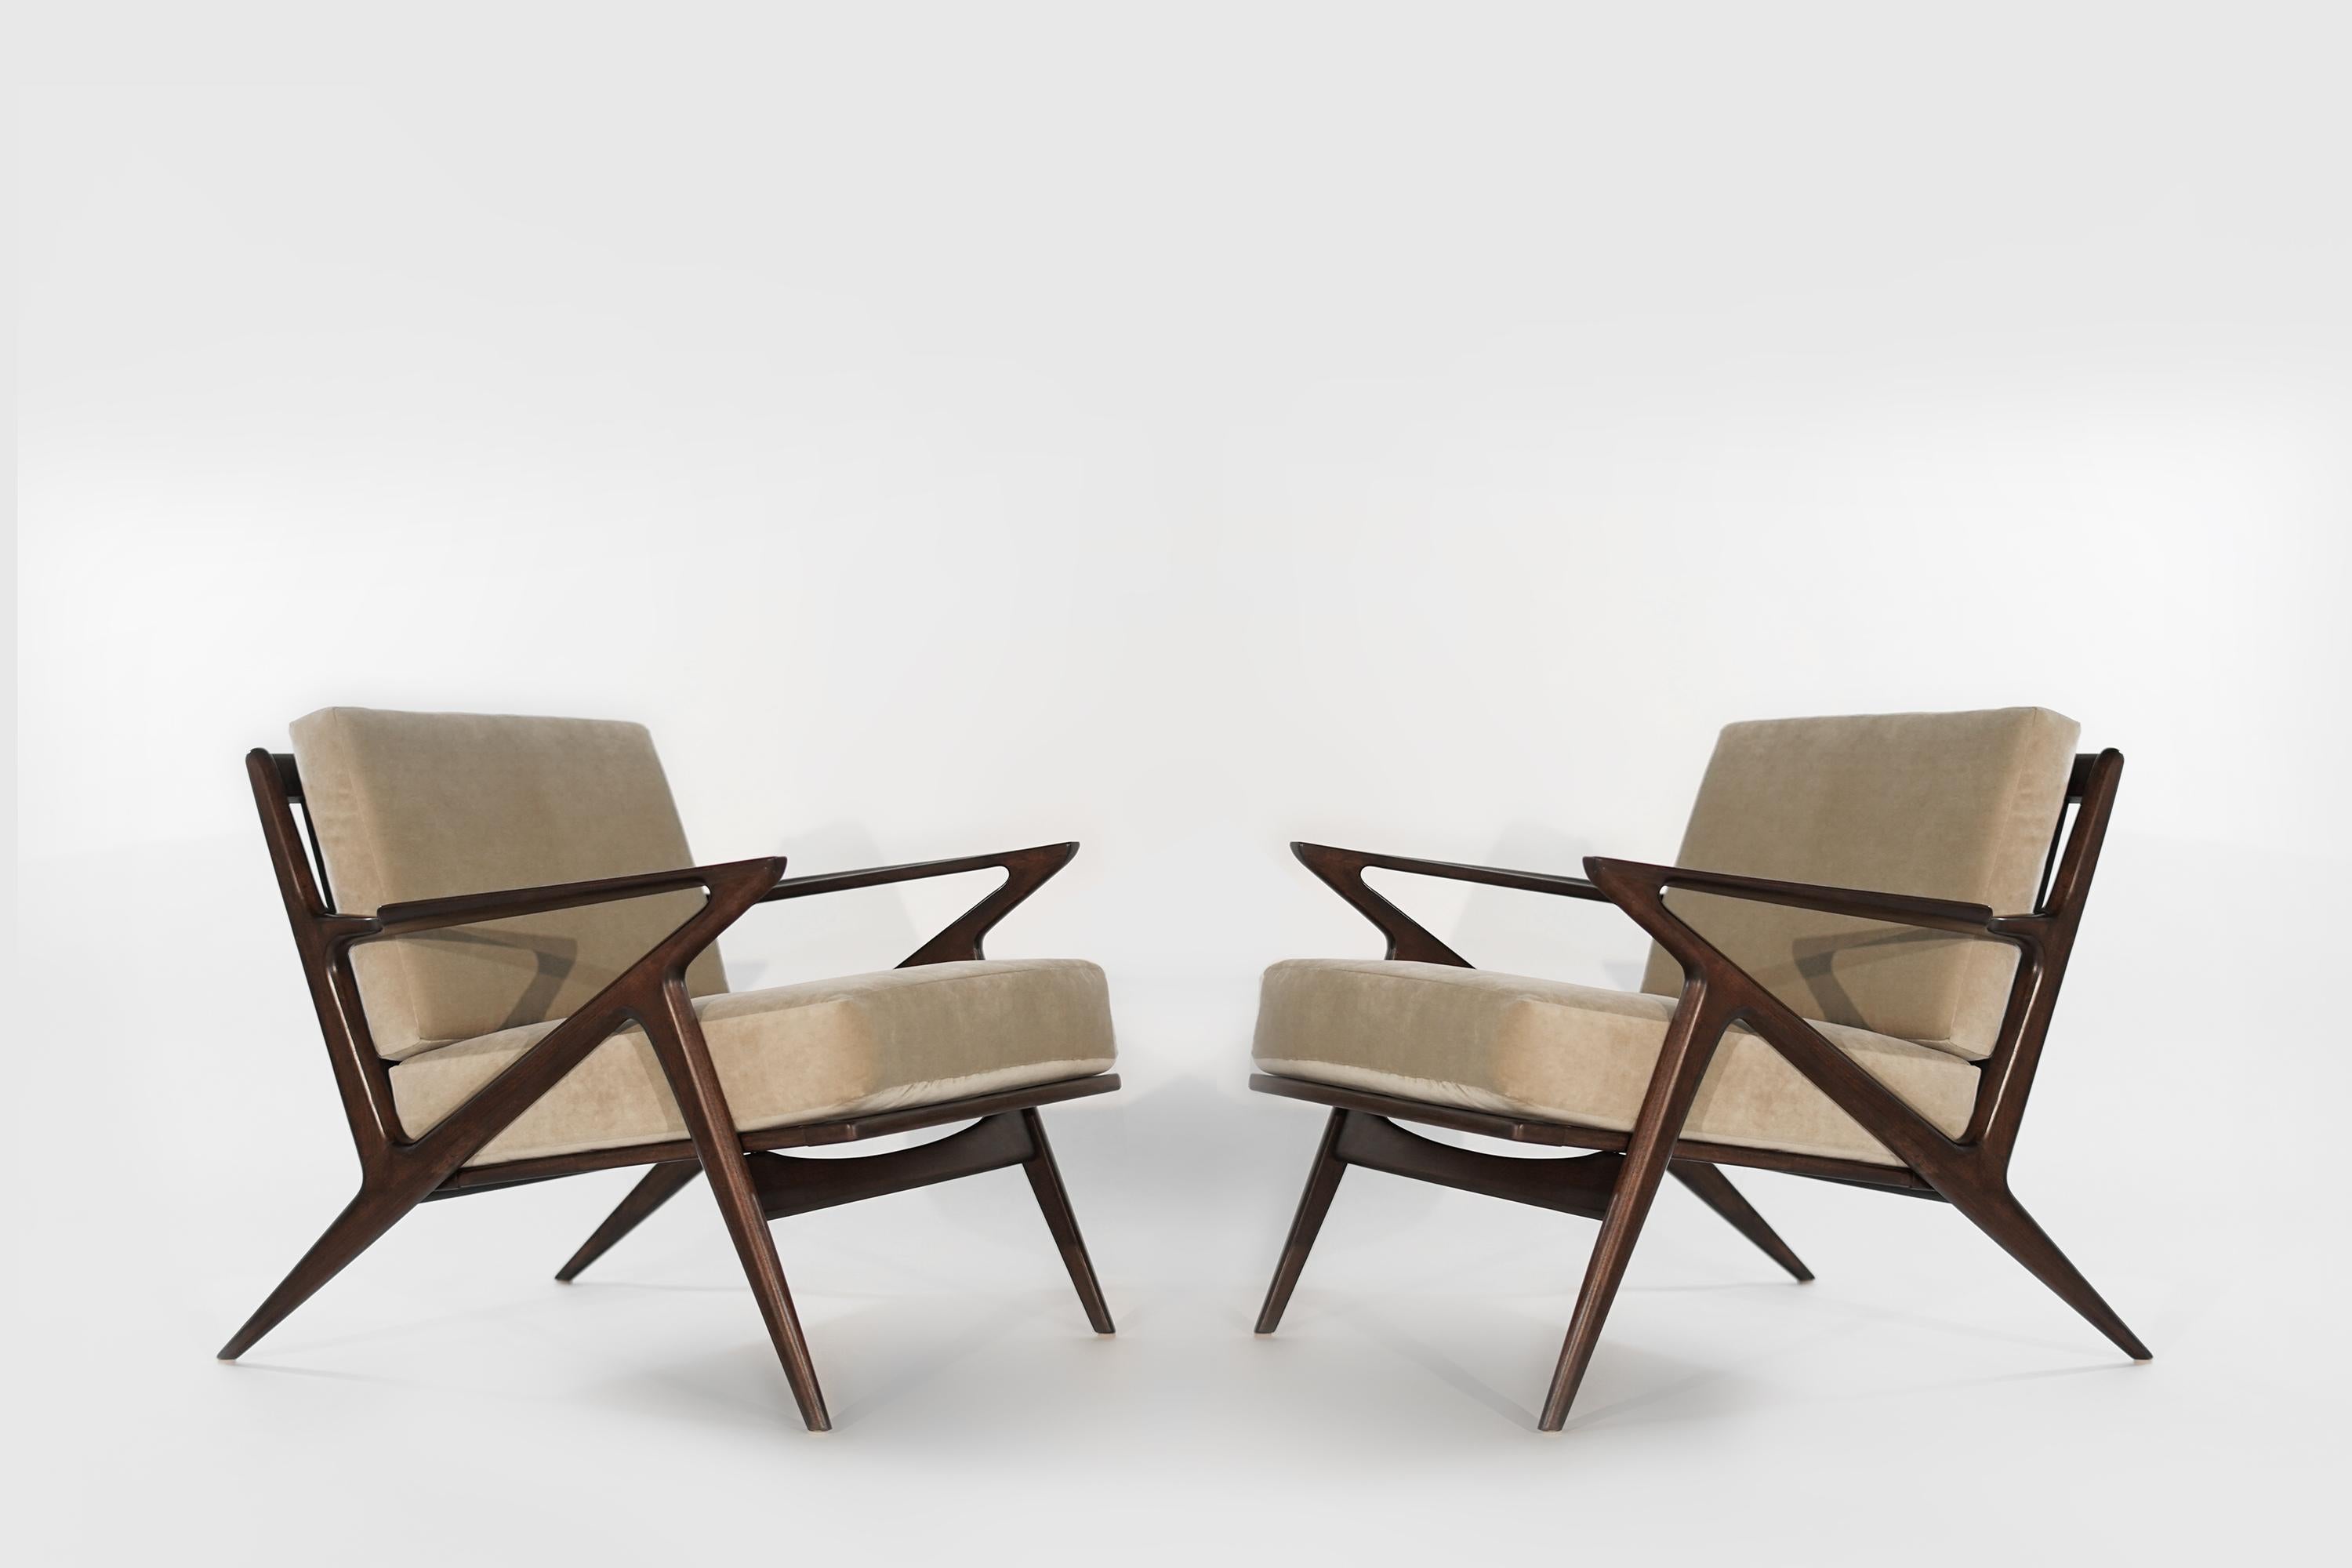 Iconic ‘Z’ lounge chairs designed by Poul Jensen for Selig, Denmark, circa 1950s.
Newly upholstered in natural velvet.